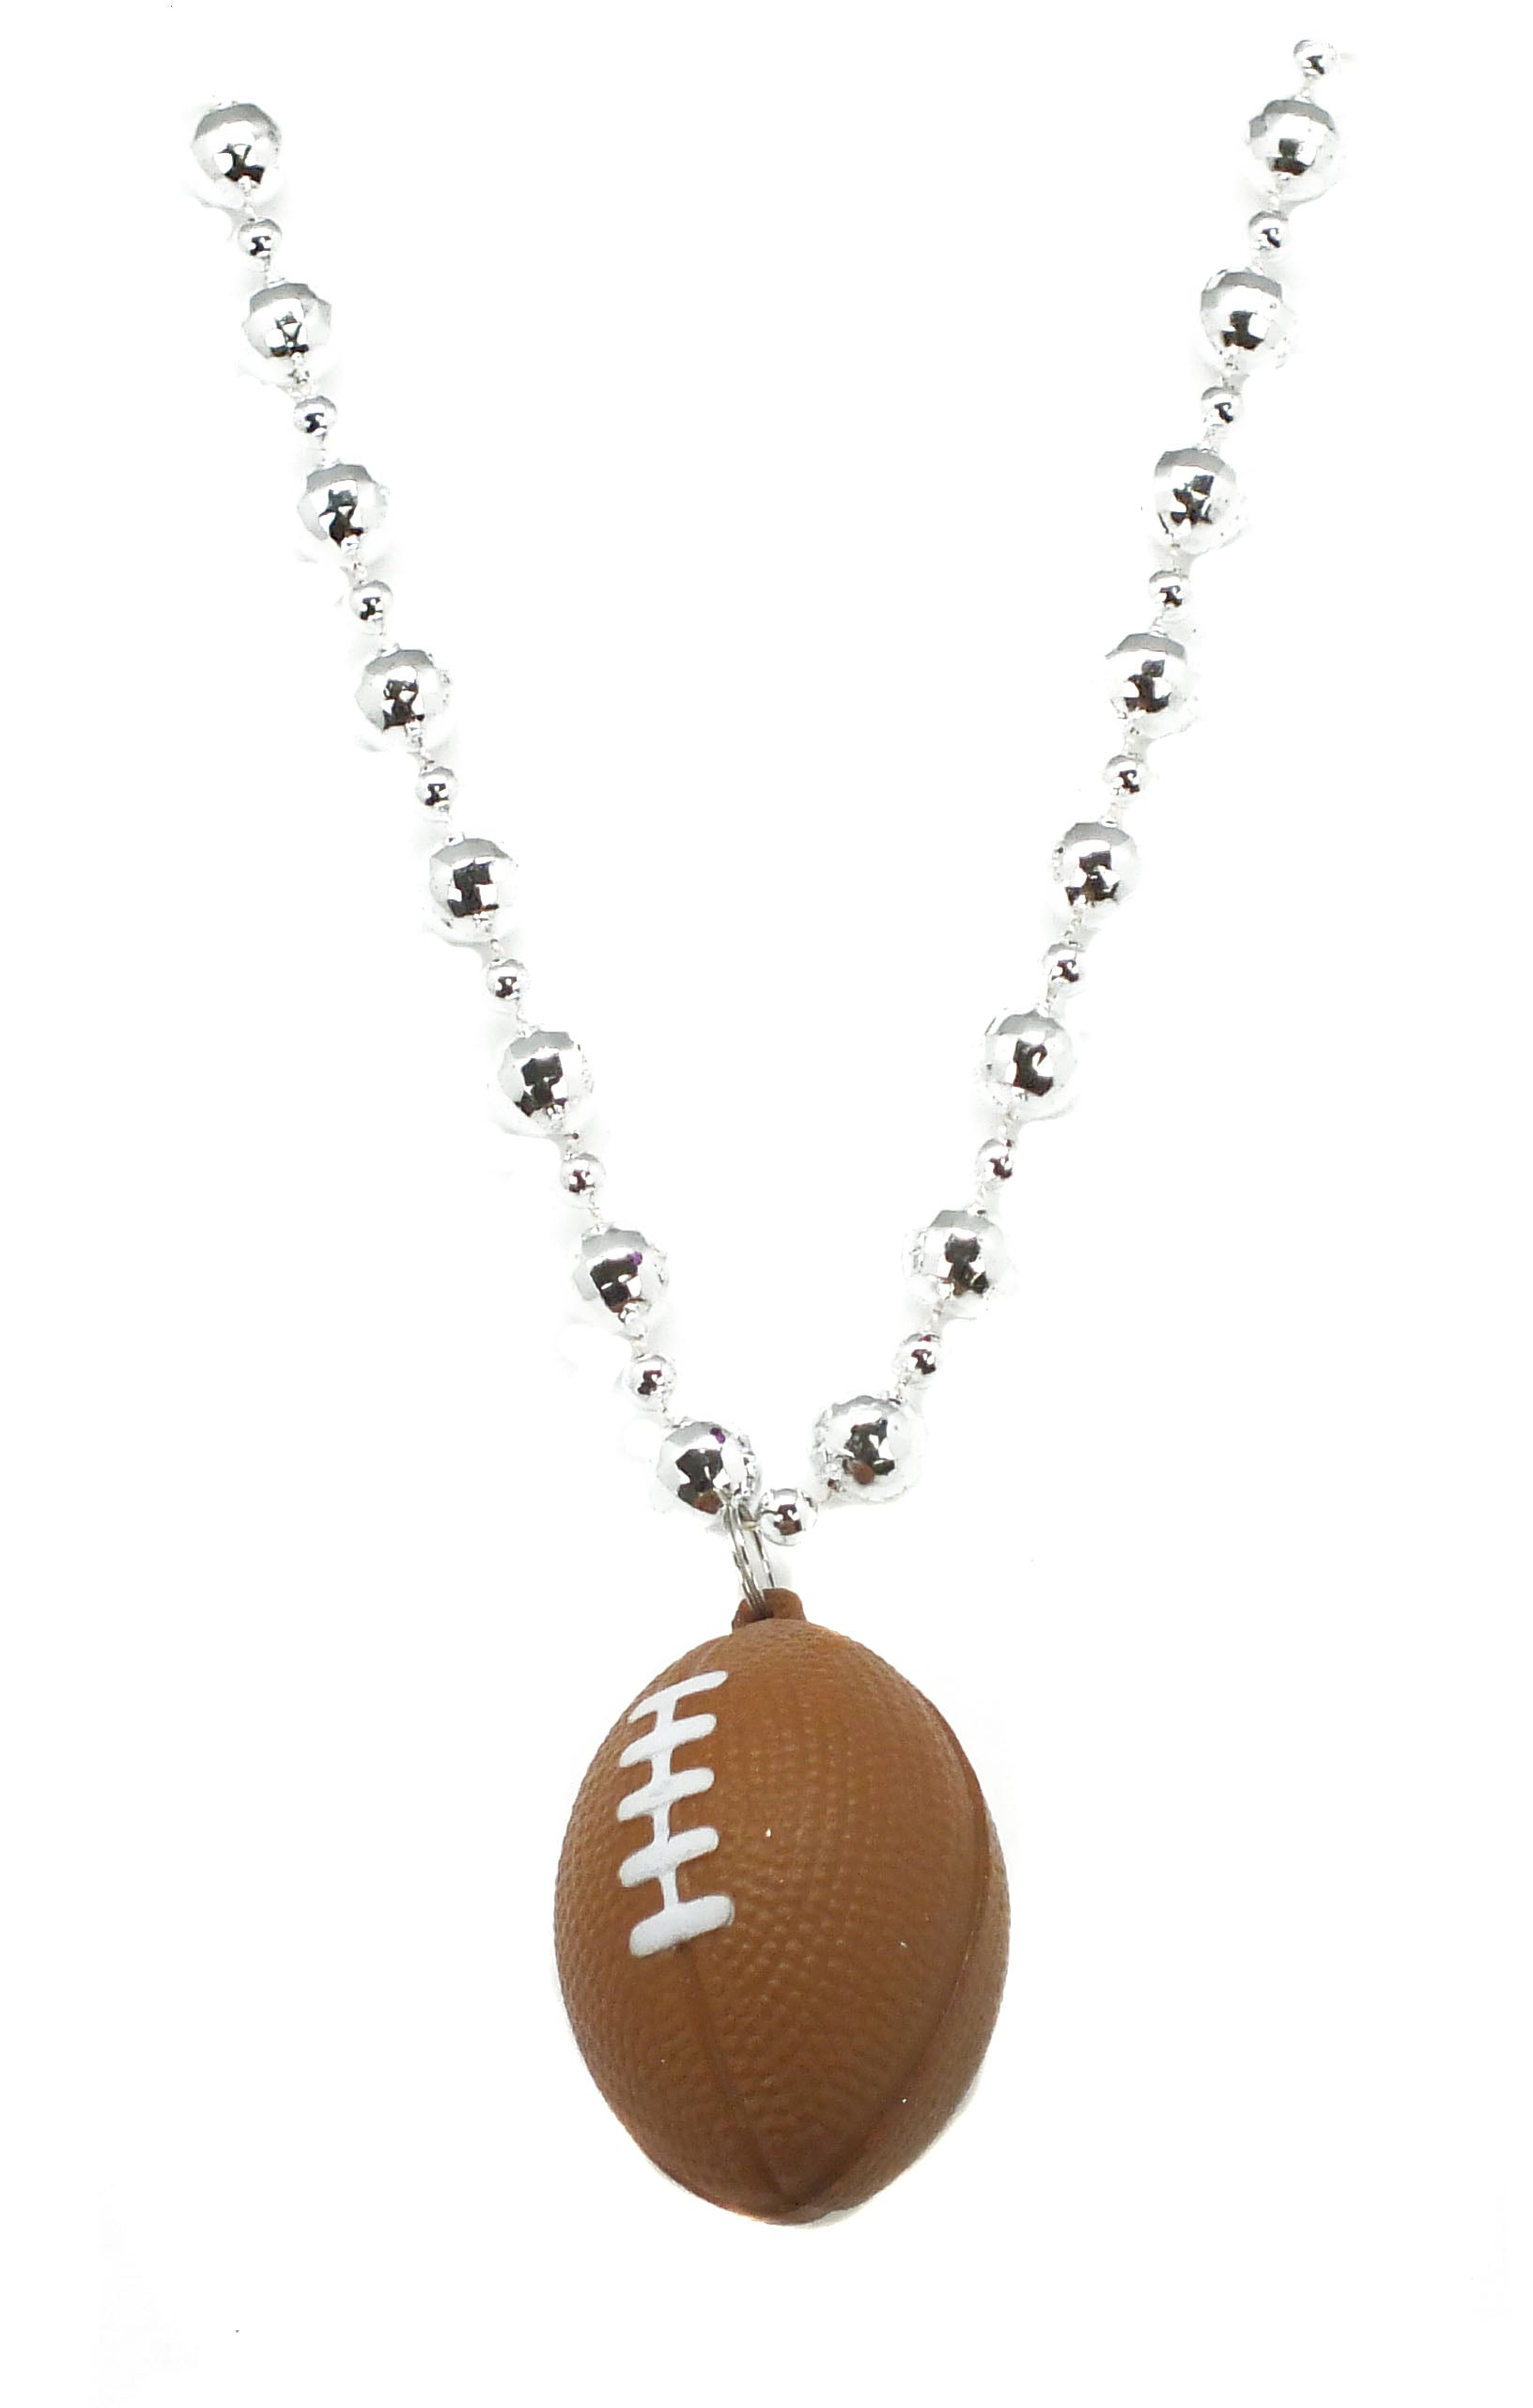 33 Football with Silver Beads